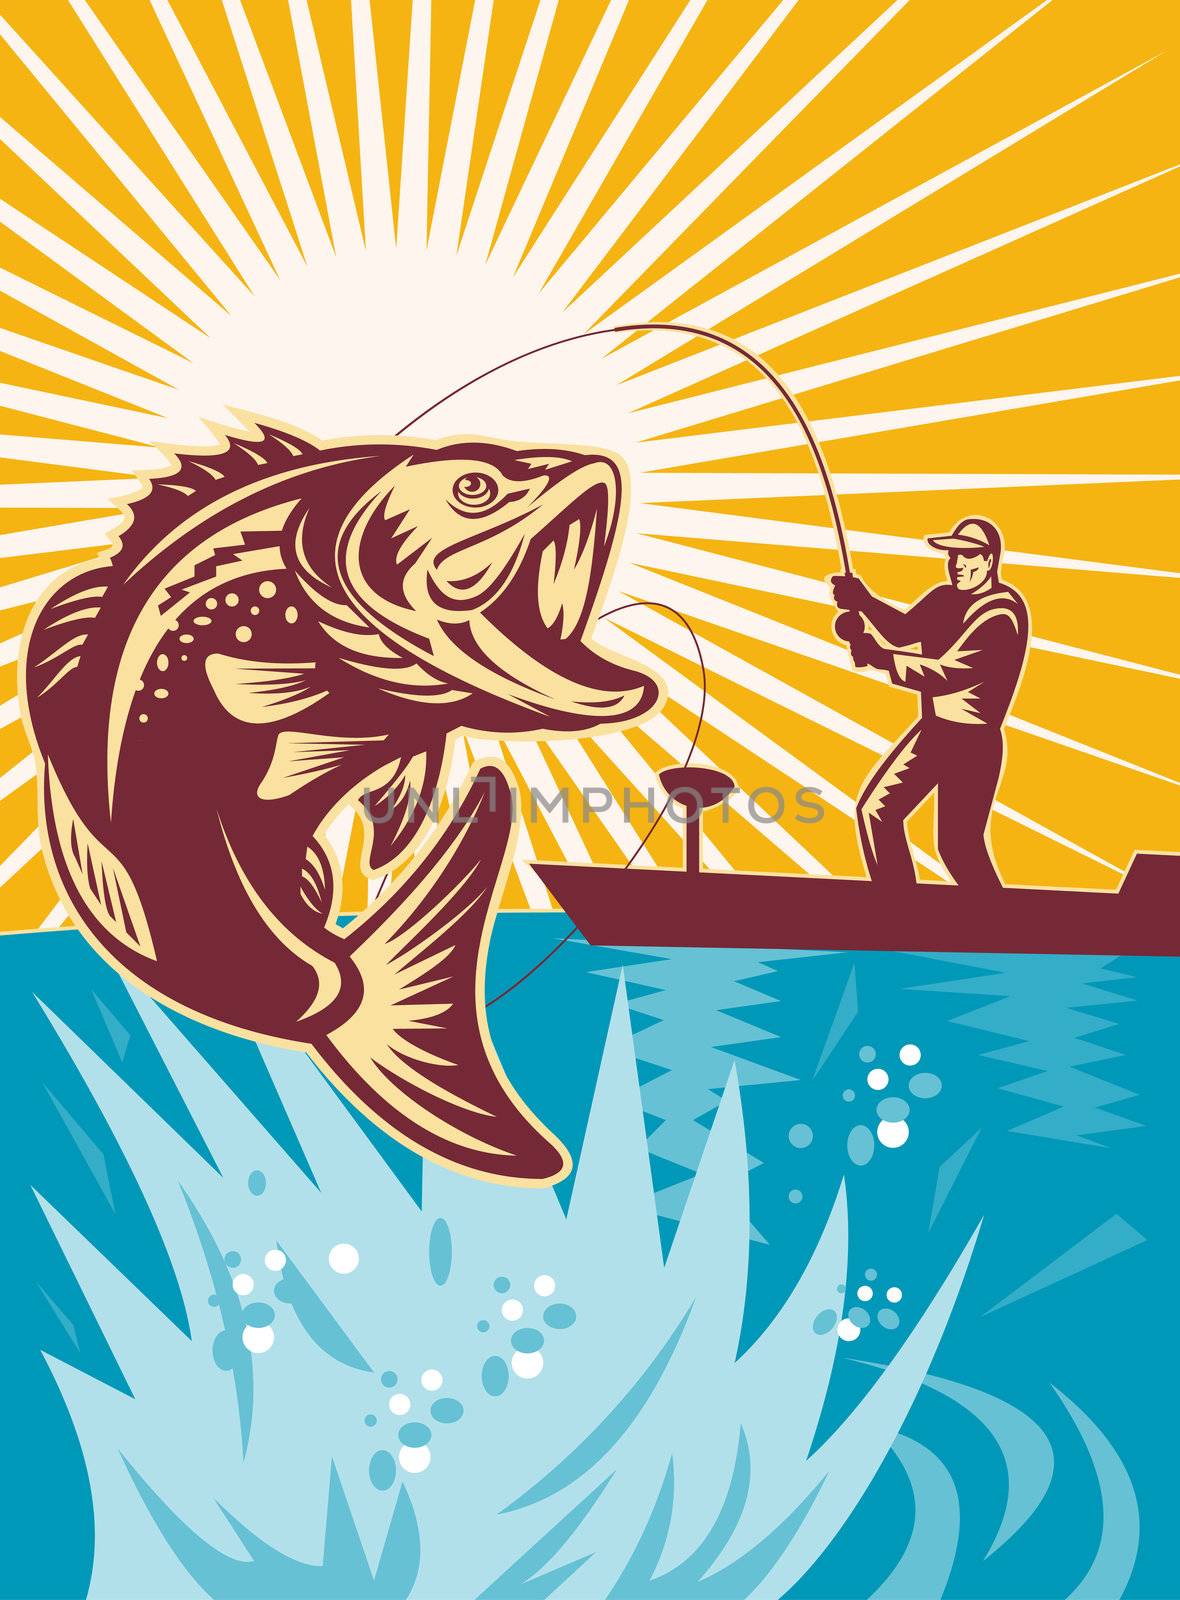 illustration of a Largemouth Bass Fish jumping being reeled by Fly Fisherman on bass boat with Fishing rod 
done in retro style